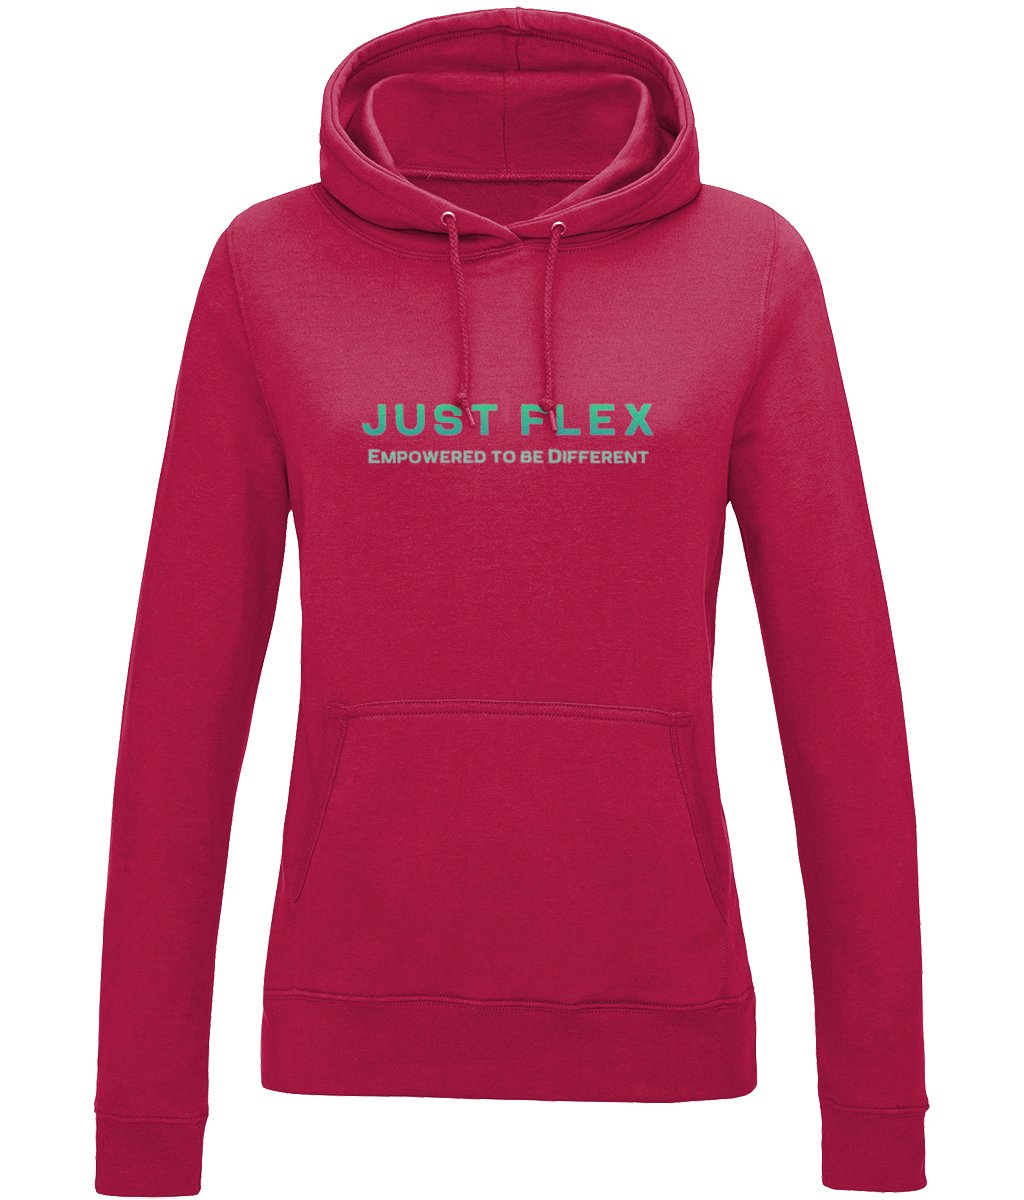 Just Flex - Empowered To Be Different Girlie College Hoodie